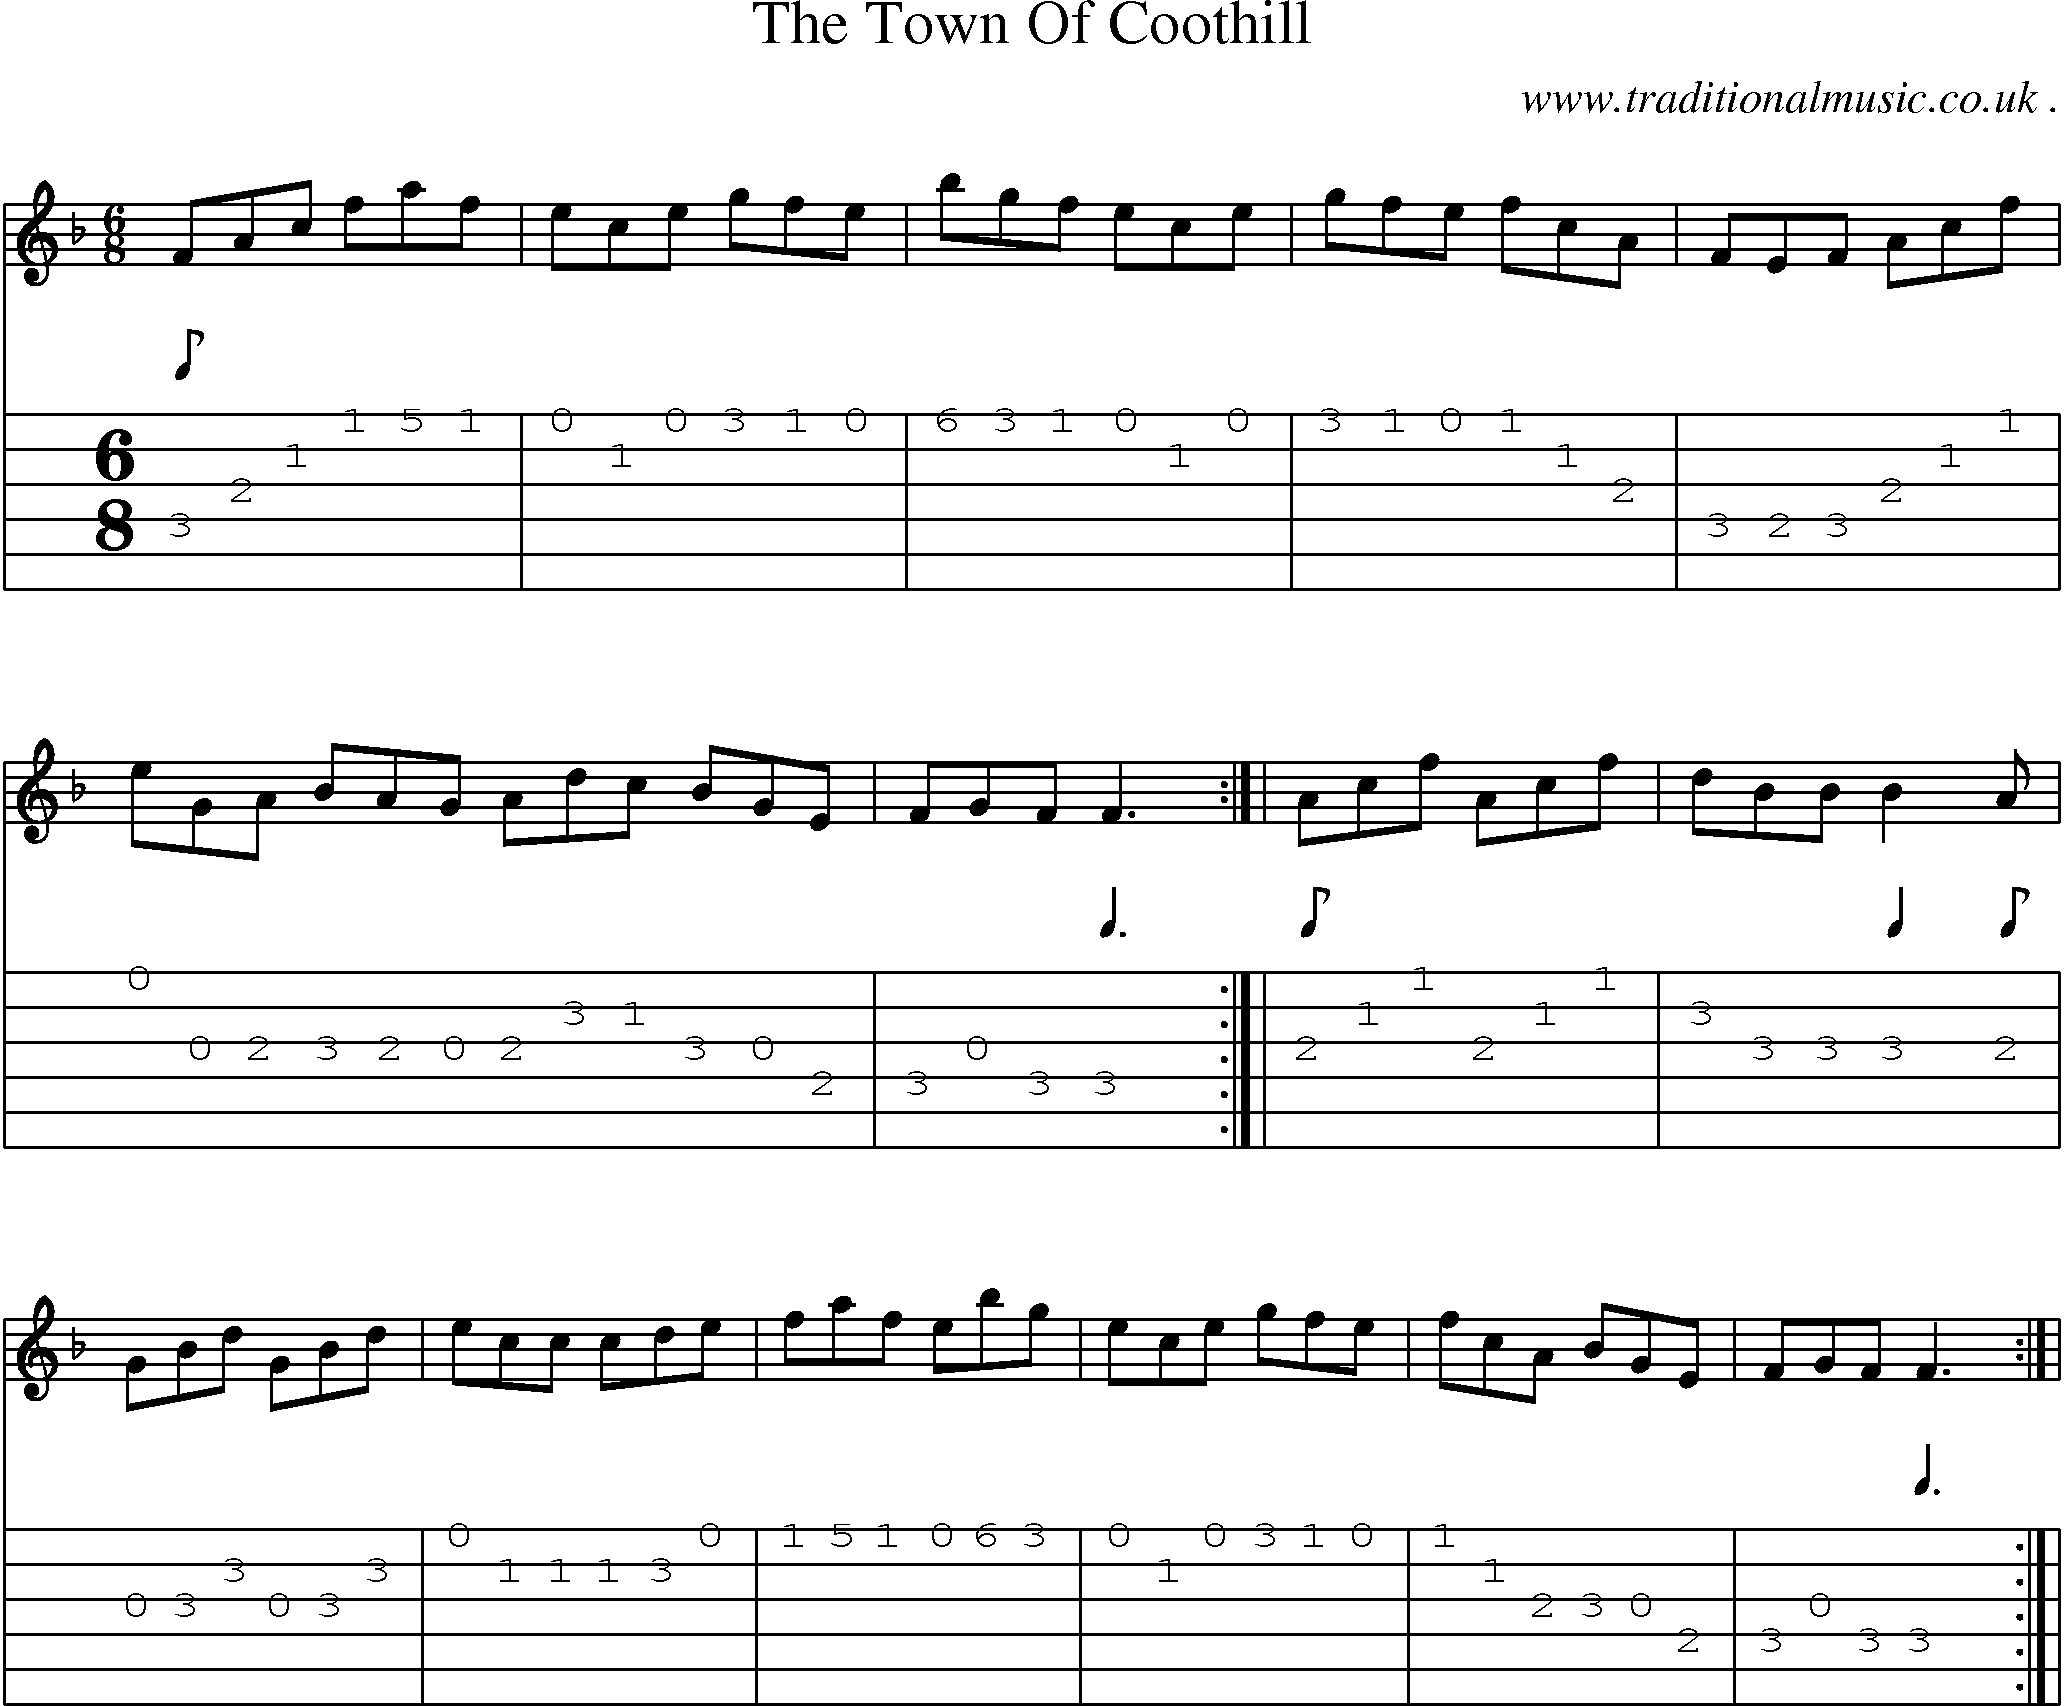 Sheet-Music and Guitar Tabs for The Town Of Coothill